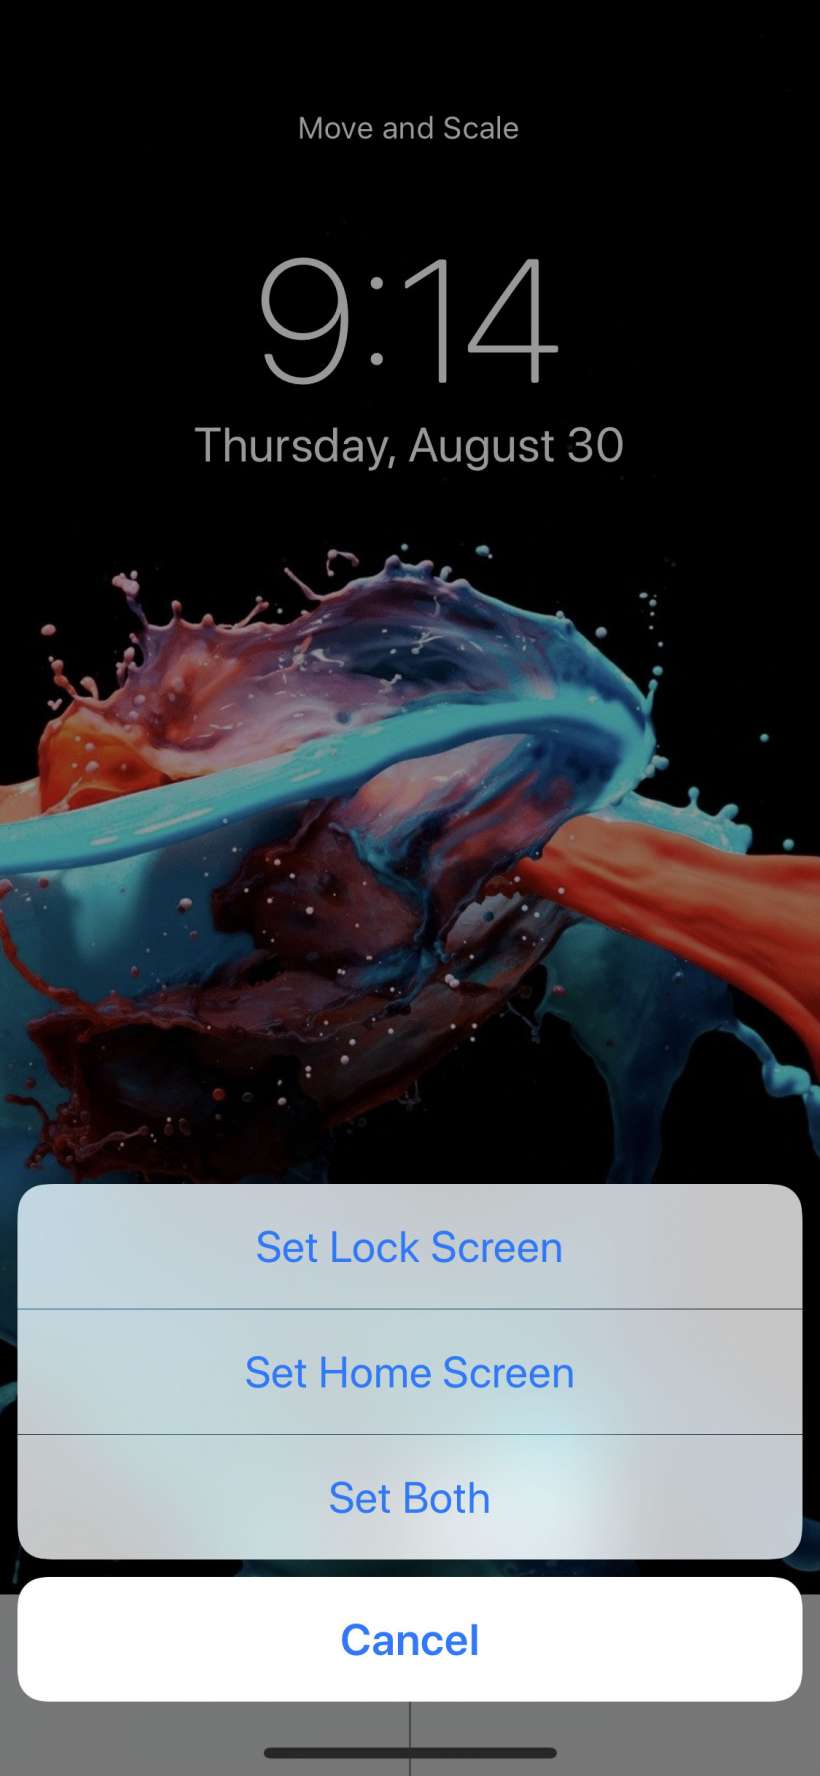 How to download and install new wallpapers on iPhone and iPad.